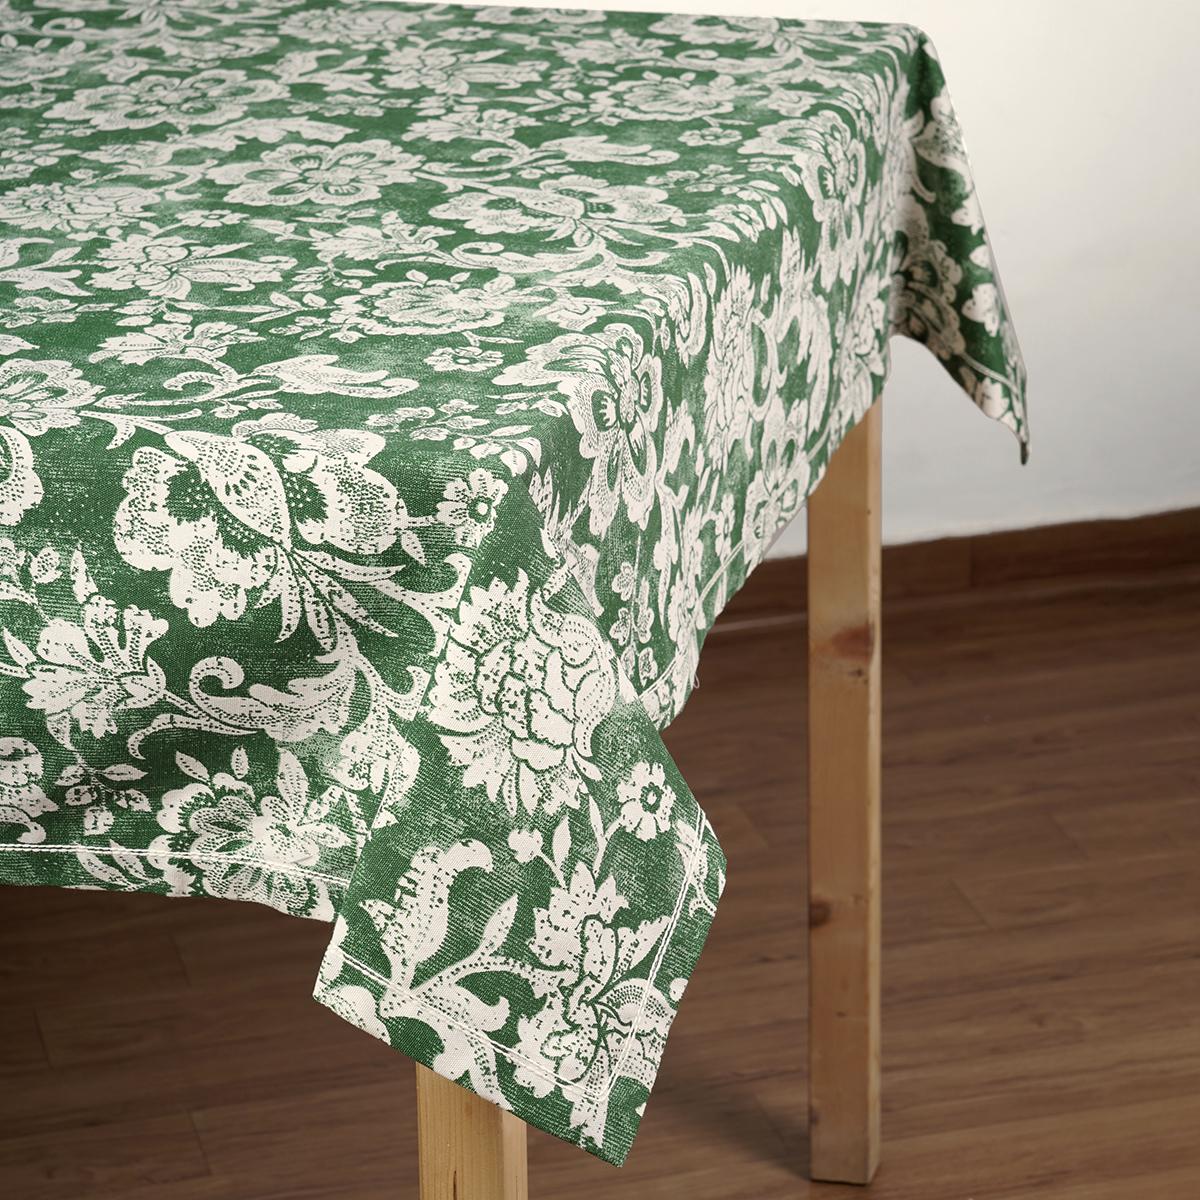 Green DOMINOTERIE bold floral print cotton table cover, sizes available